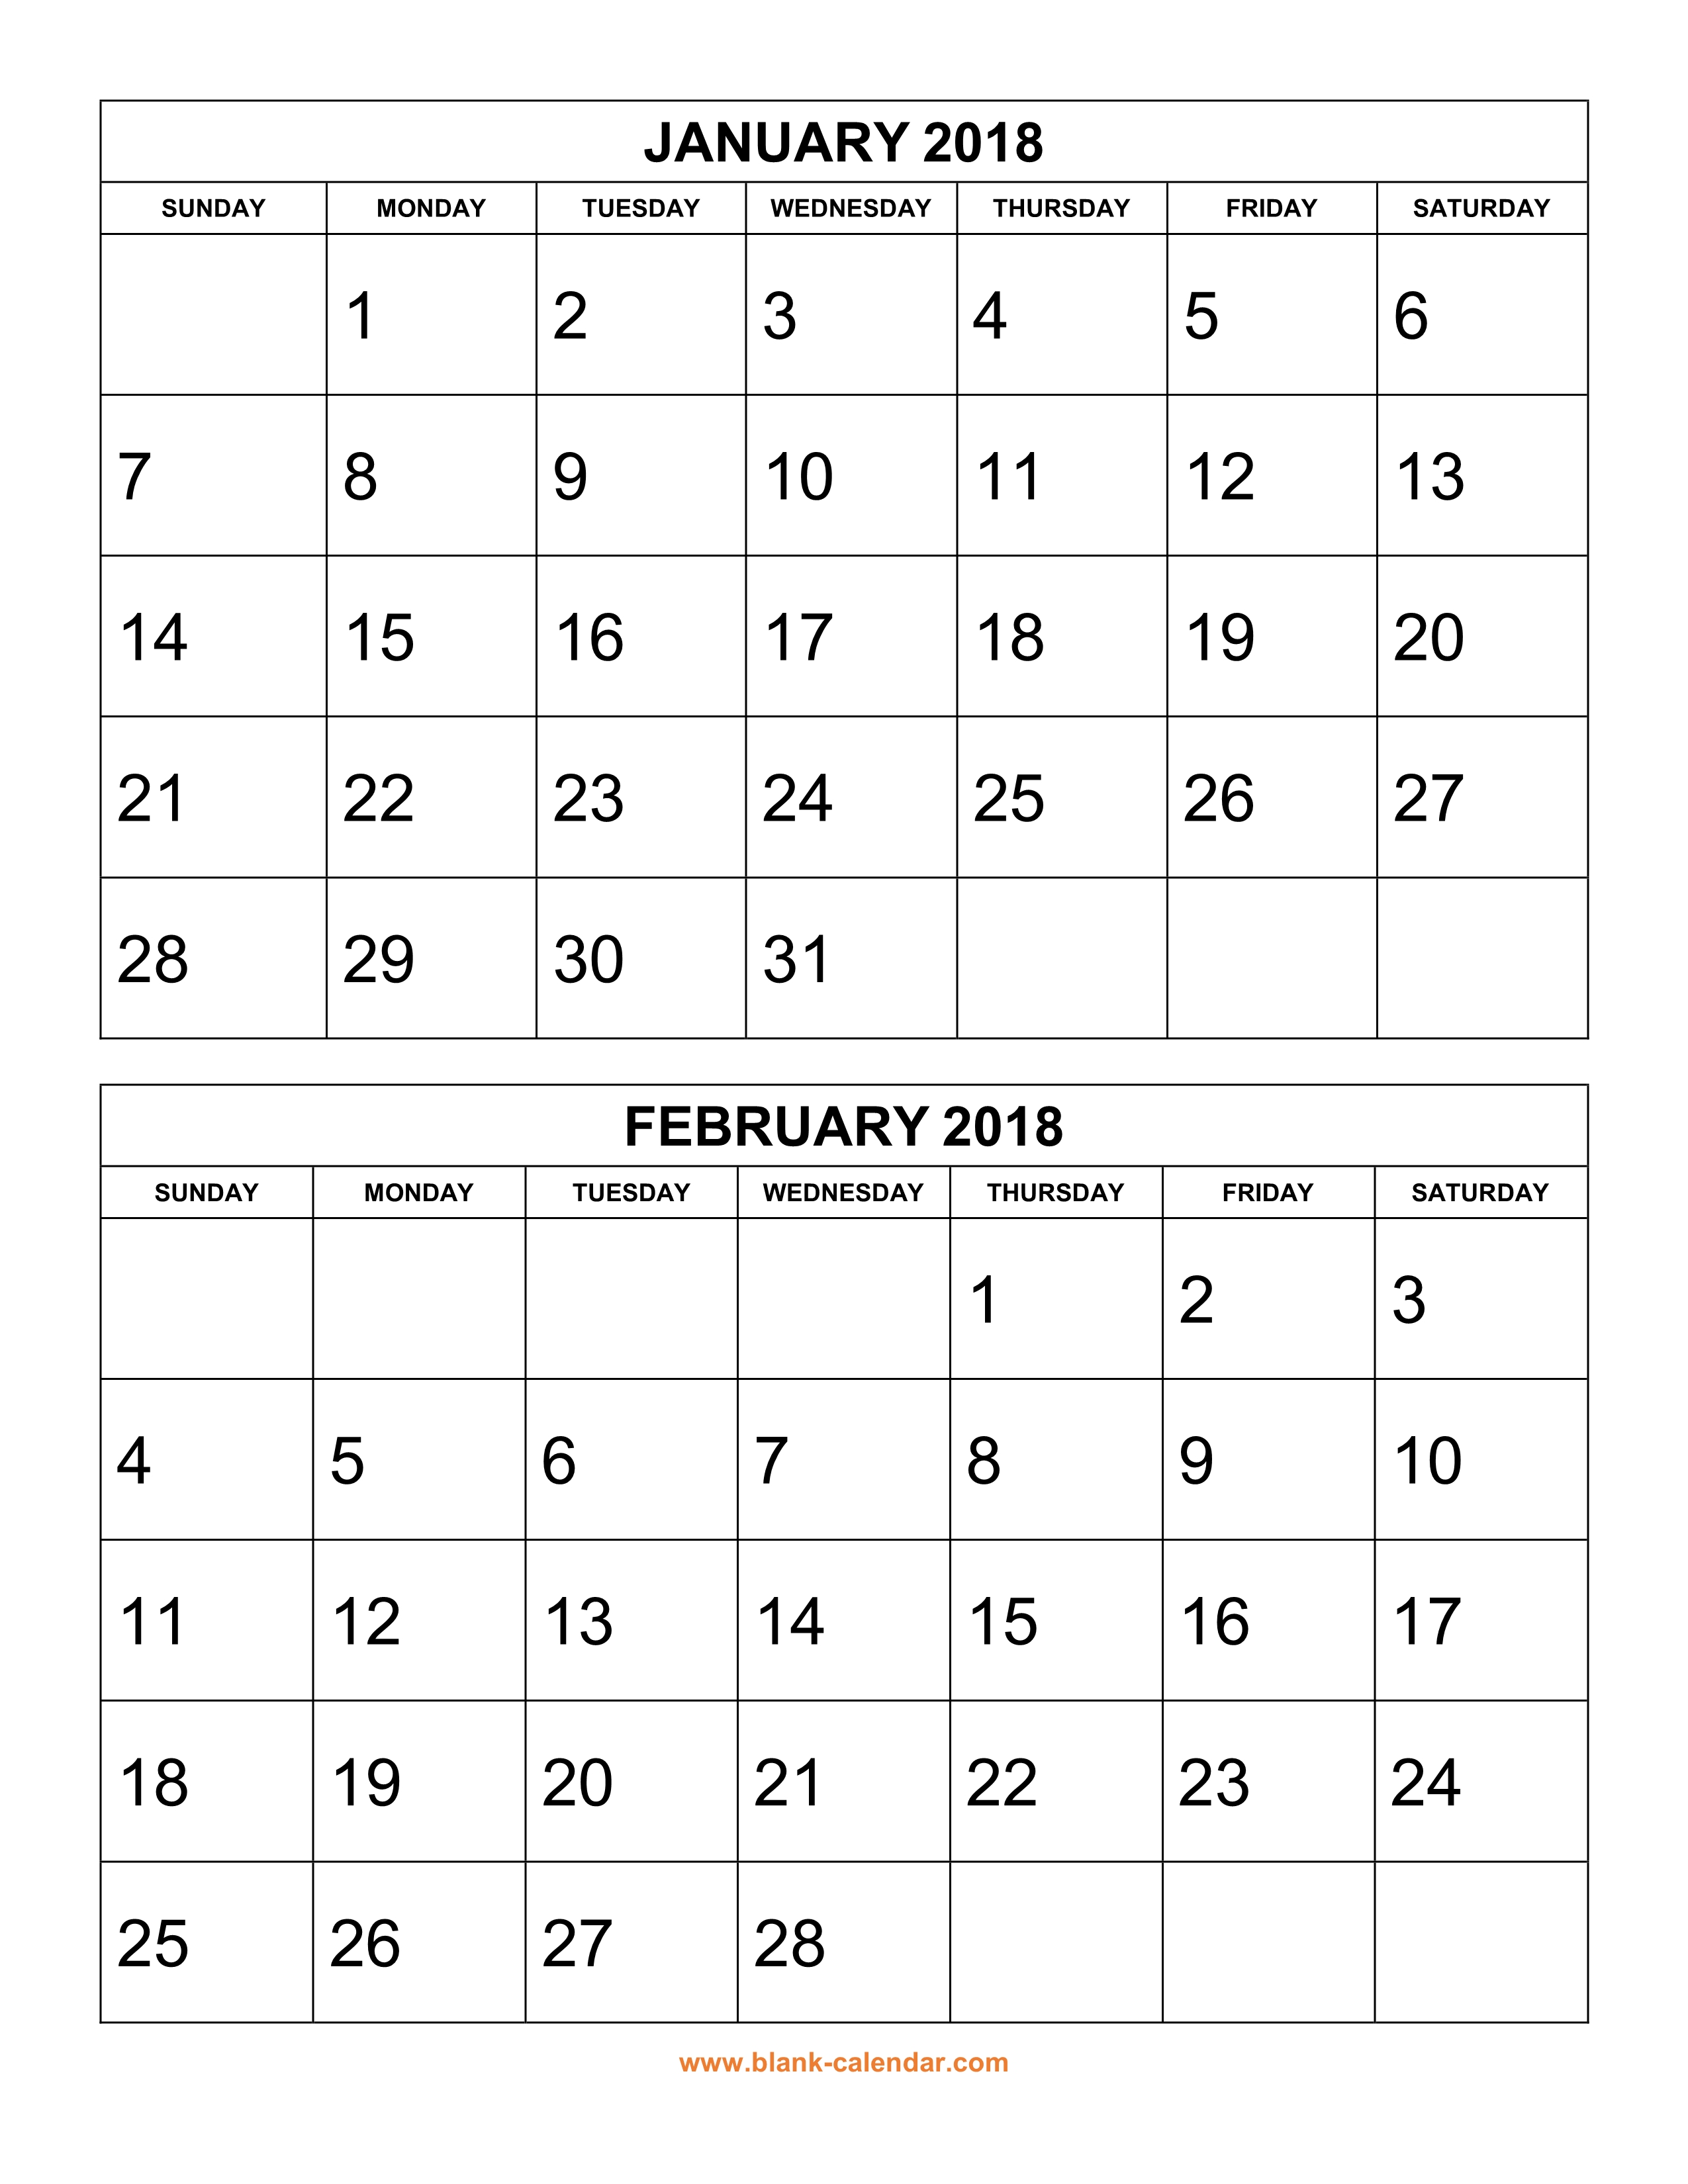 free-download-printable-calendar-2018-2-months-per-page-6-pages-vertical